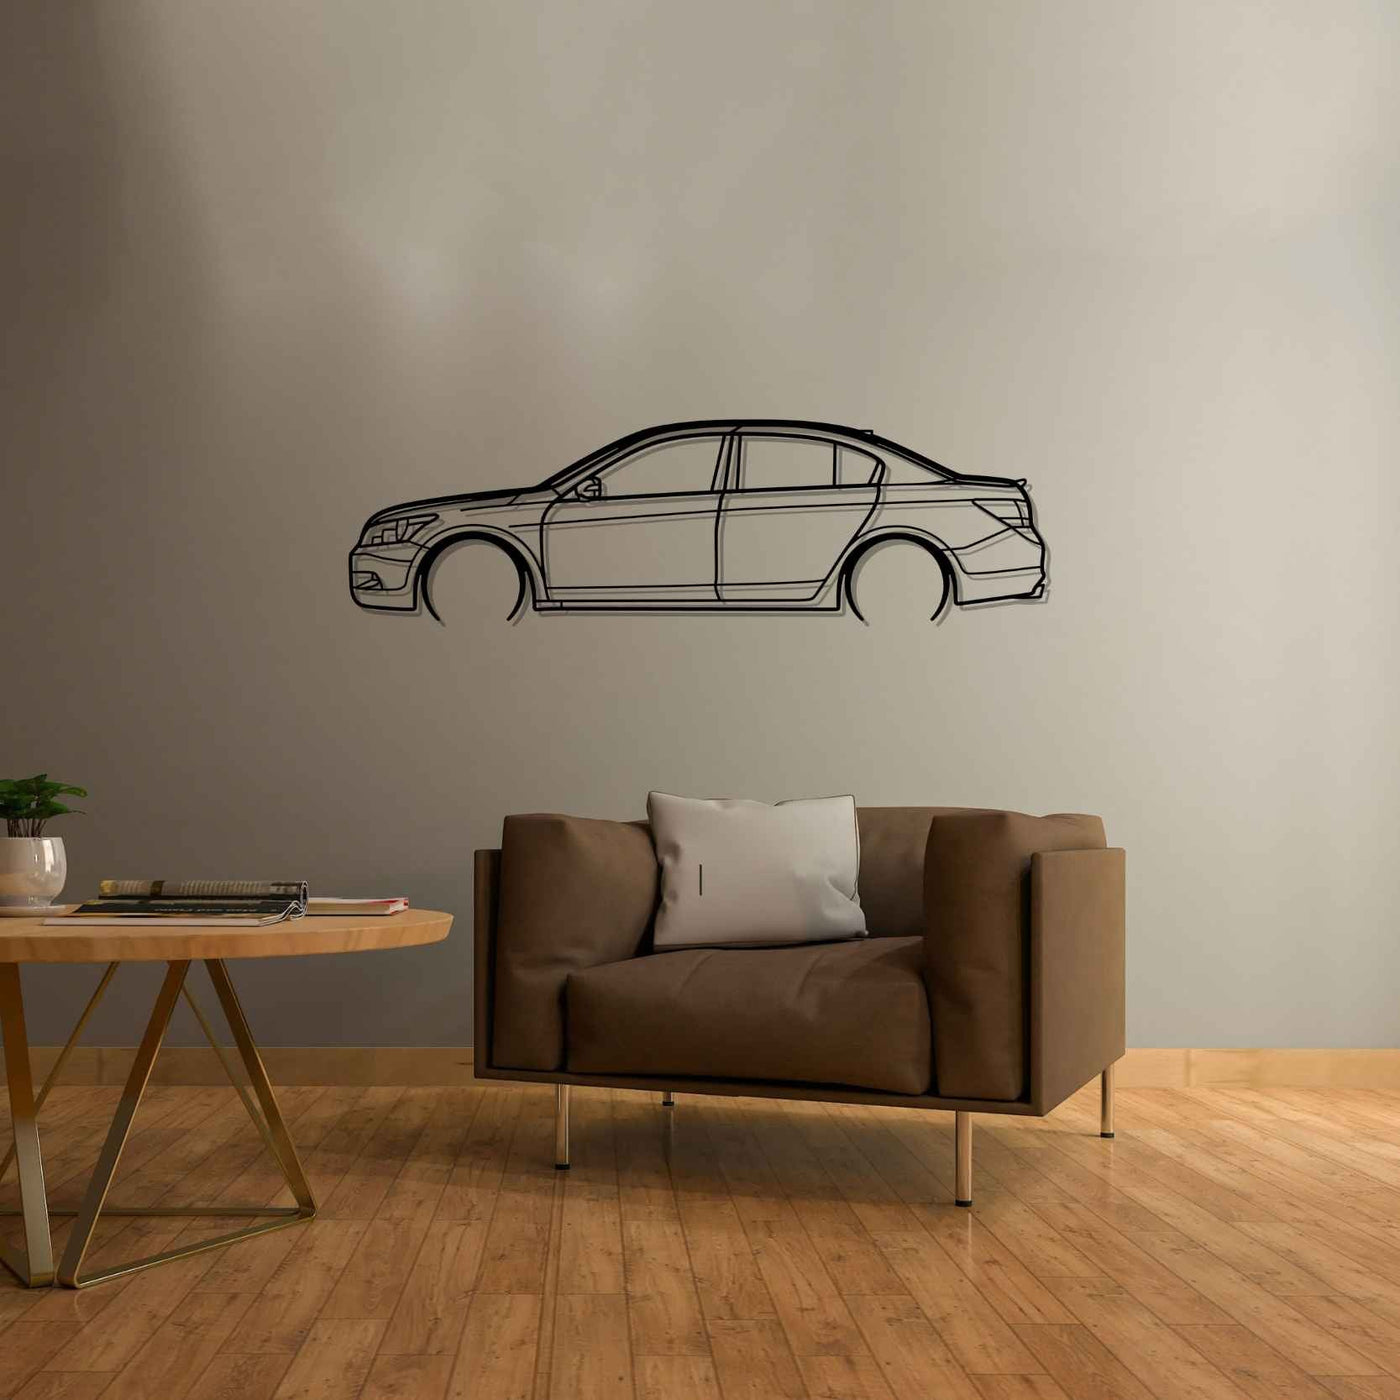 Accord 2009 Detailed Silhouette Metal Wall Art